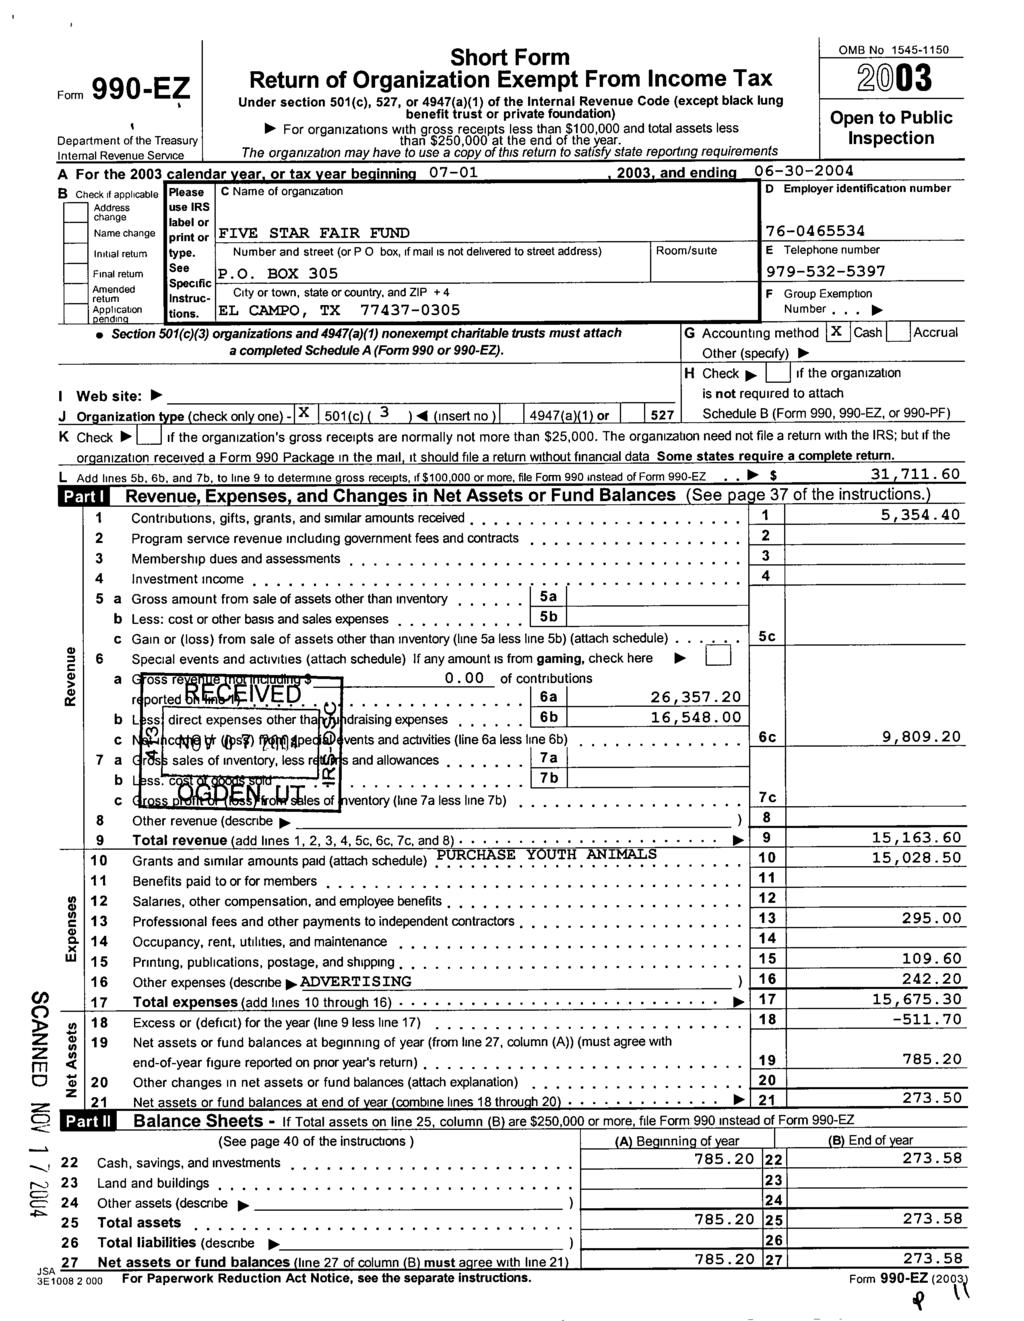 990-EZ SShort Form Return of Organization Exempt From Income Tax 2003 C7 d 20 Other changes in net assets or fund balances (attach explanation),,,,,,,,,,,,.,.,,, 20 Z 21 N e t 